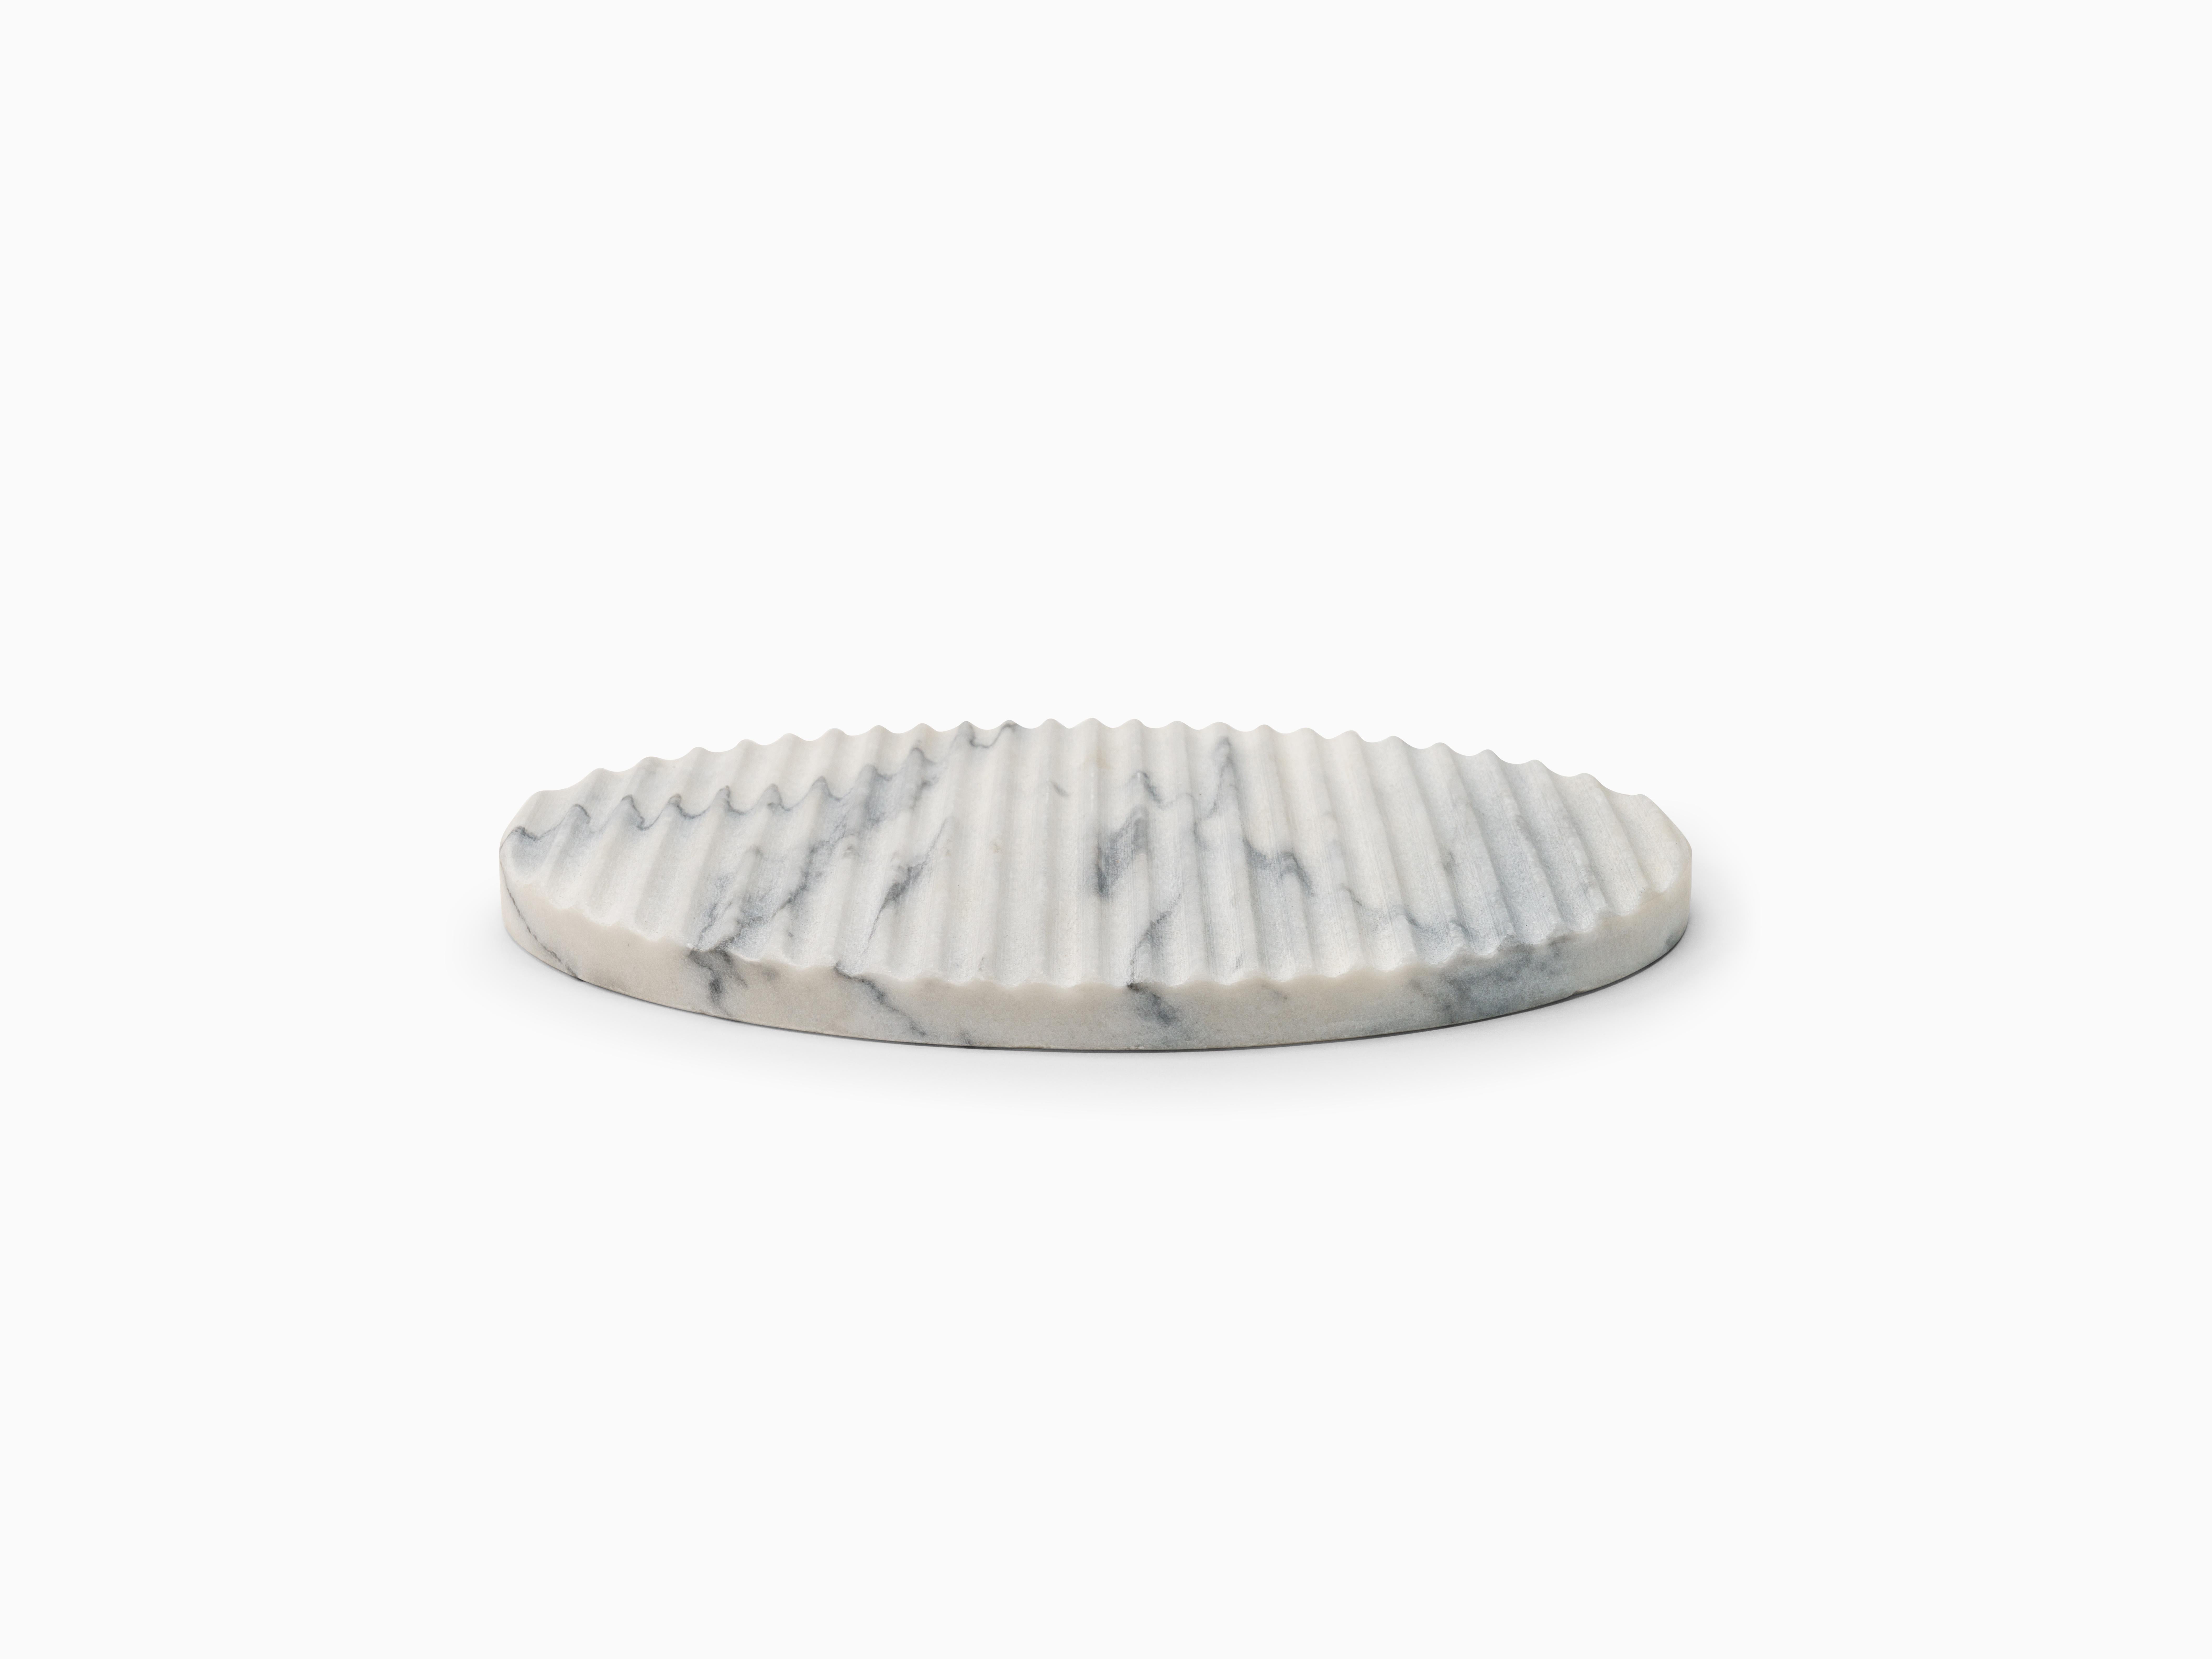 Manuel Aires Mateus creates four elegant stone platters inspired by a simple, circular shape, with beautiful Estremoz marble stone grooved in a classic pattern. Its unique look is achieved by placing vertical grooves carved in its pristine surface,